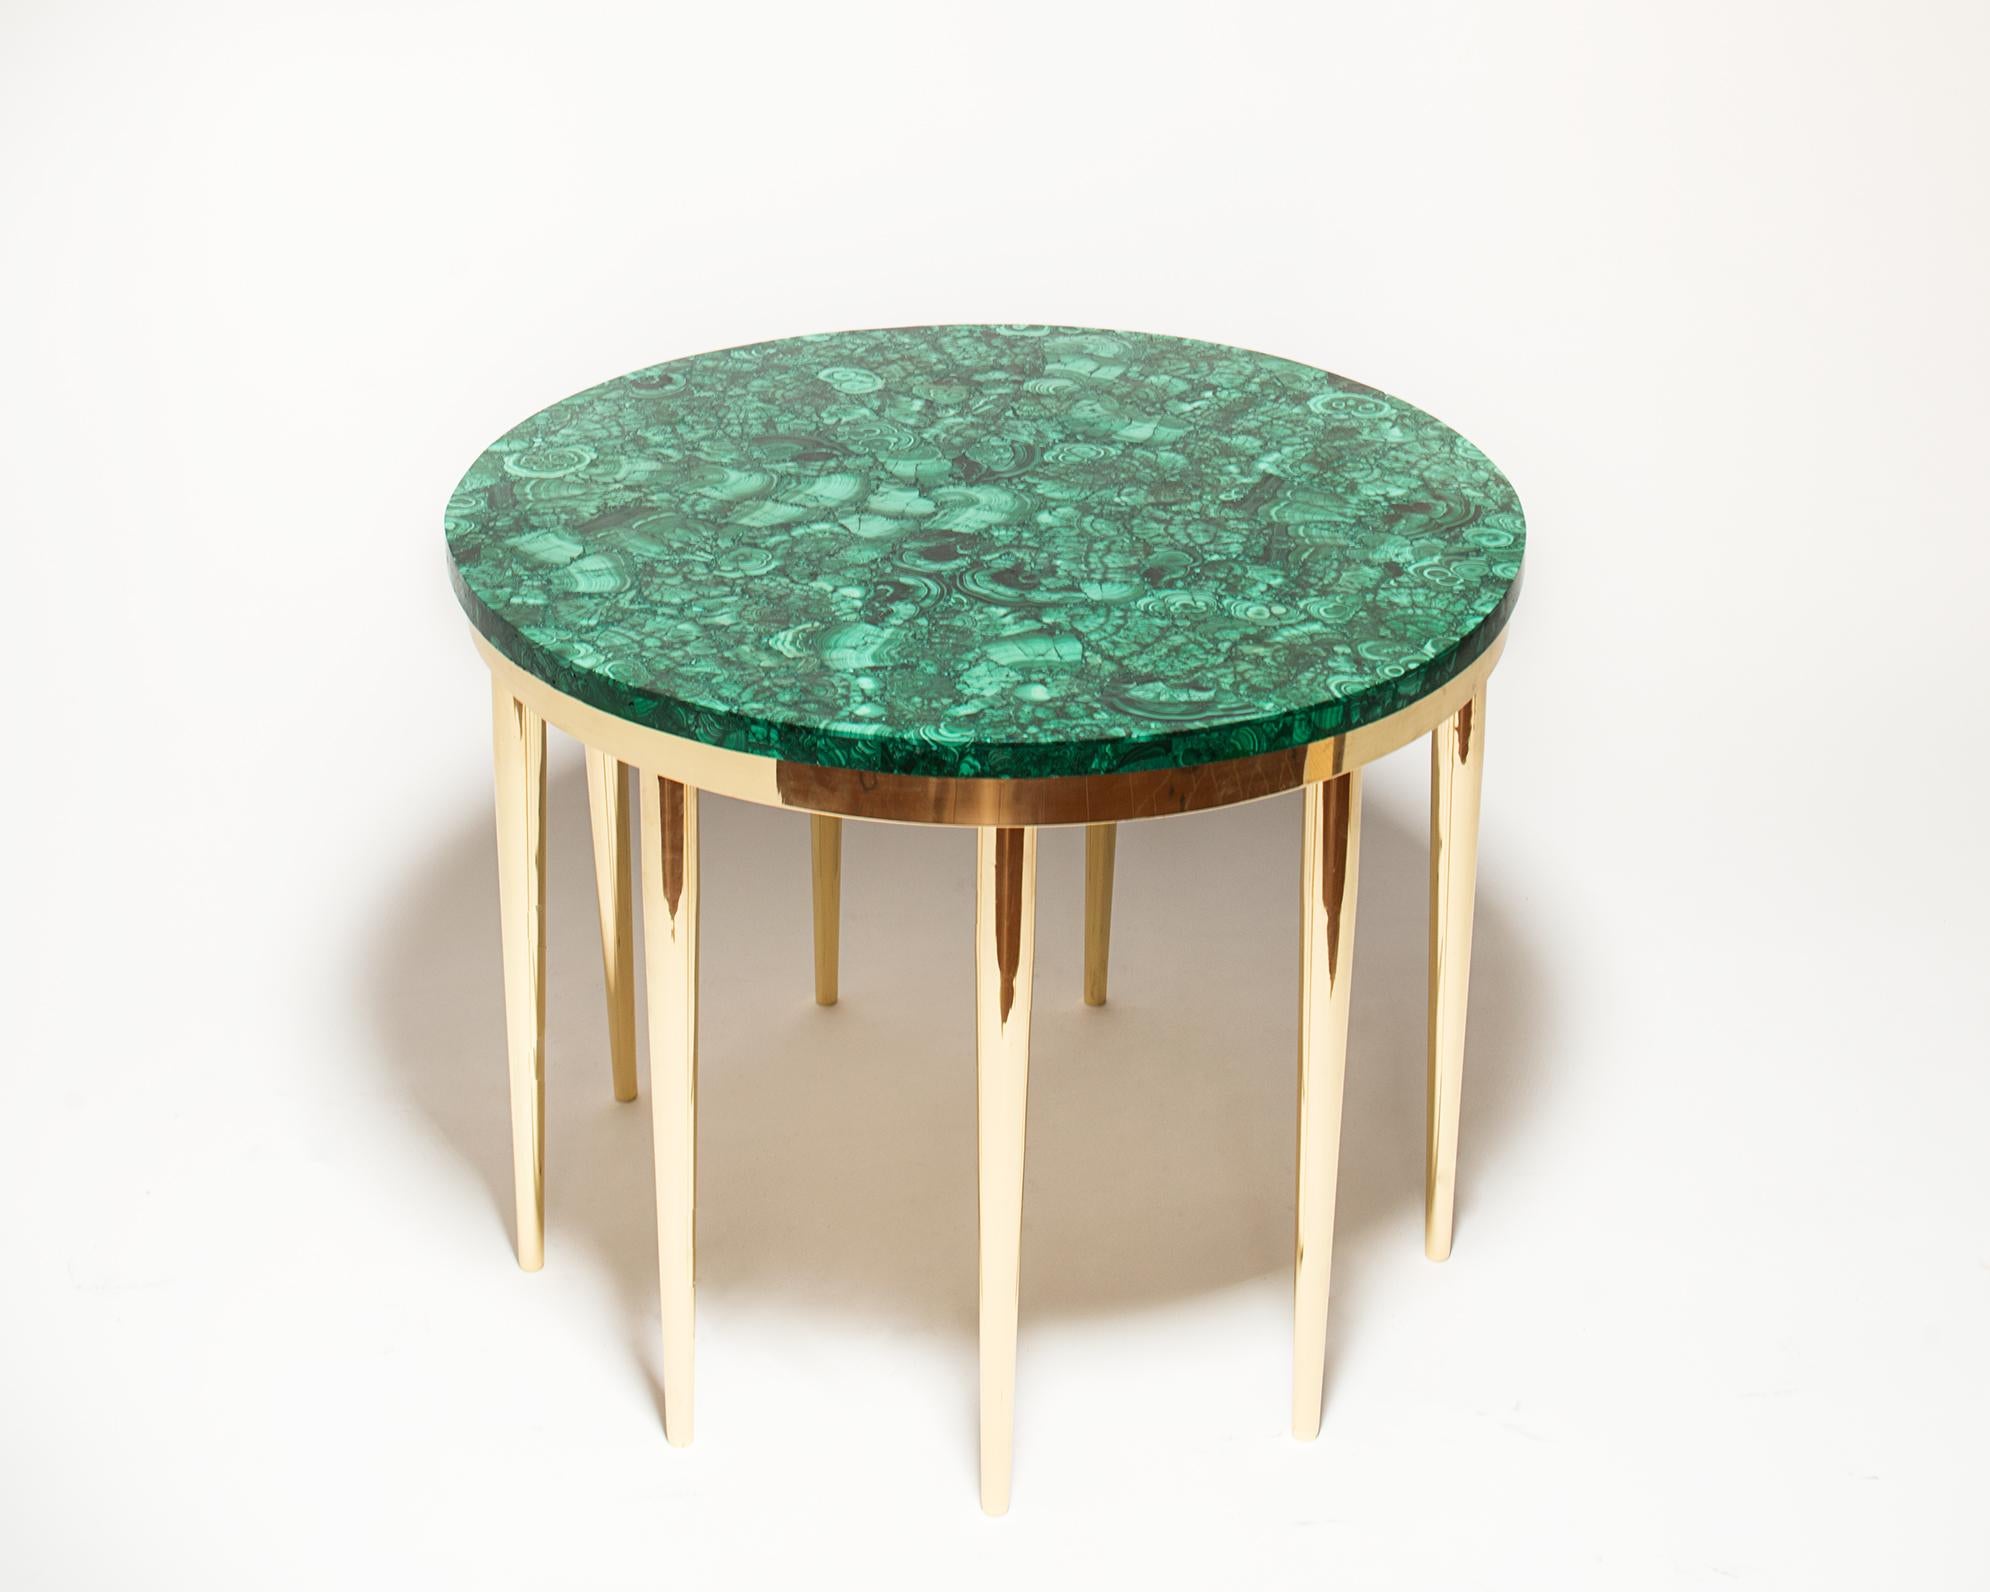 Coffee table with circular top in Malachite and with nine brass legs designed by Studio Superego for Superego Editions, in 2018. Unique piece.

Biography
Superego Editions were born in 2006, performing a constant activity of research in decorative